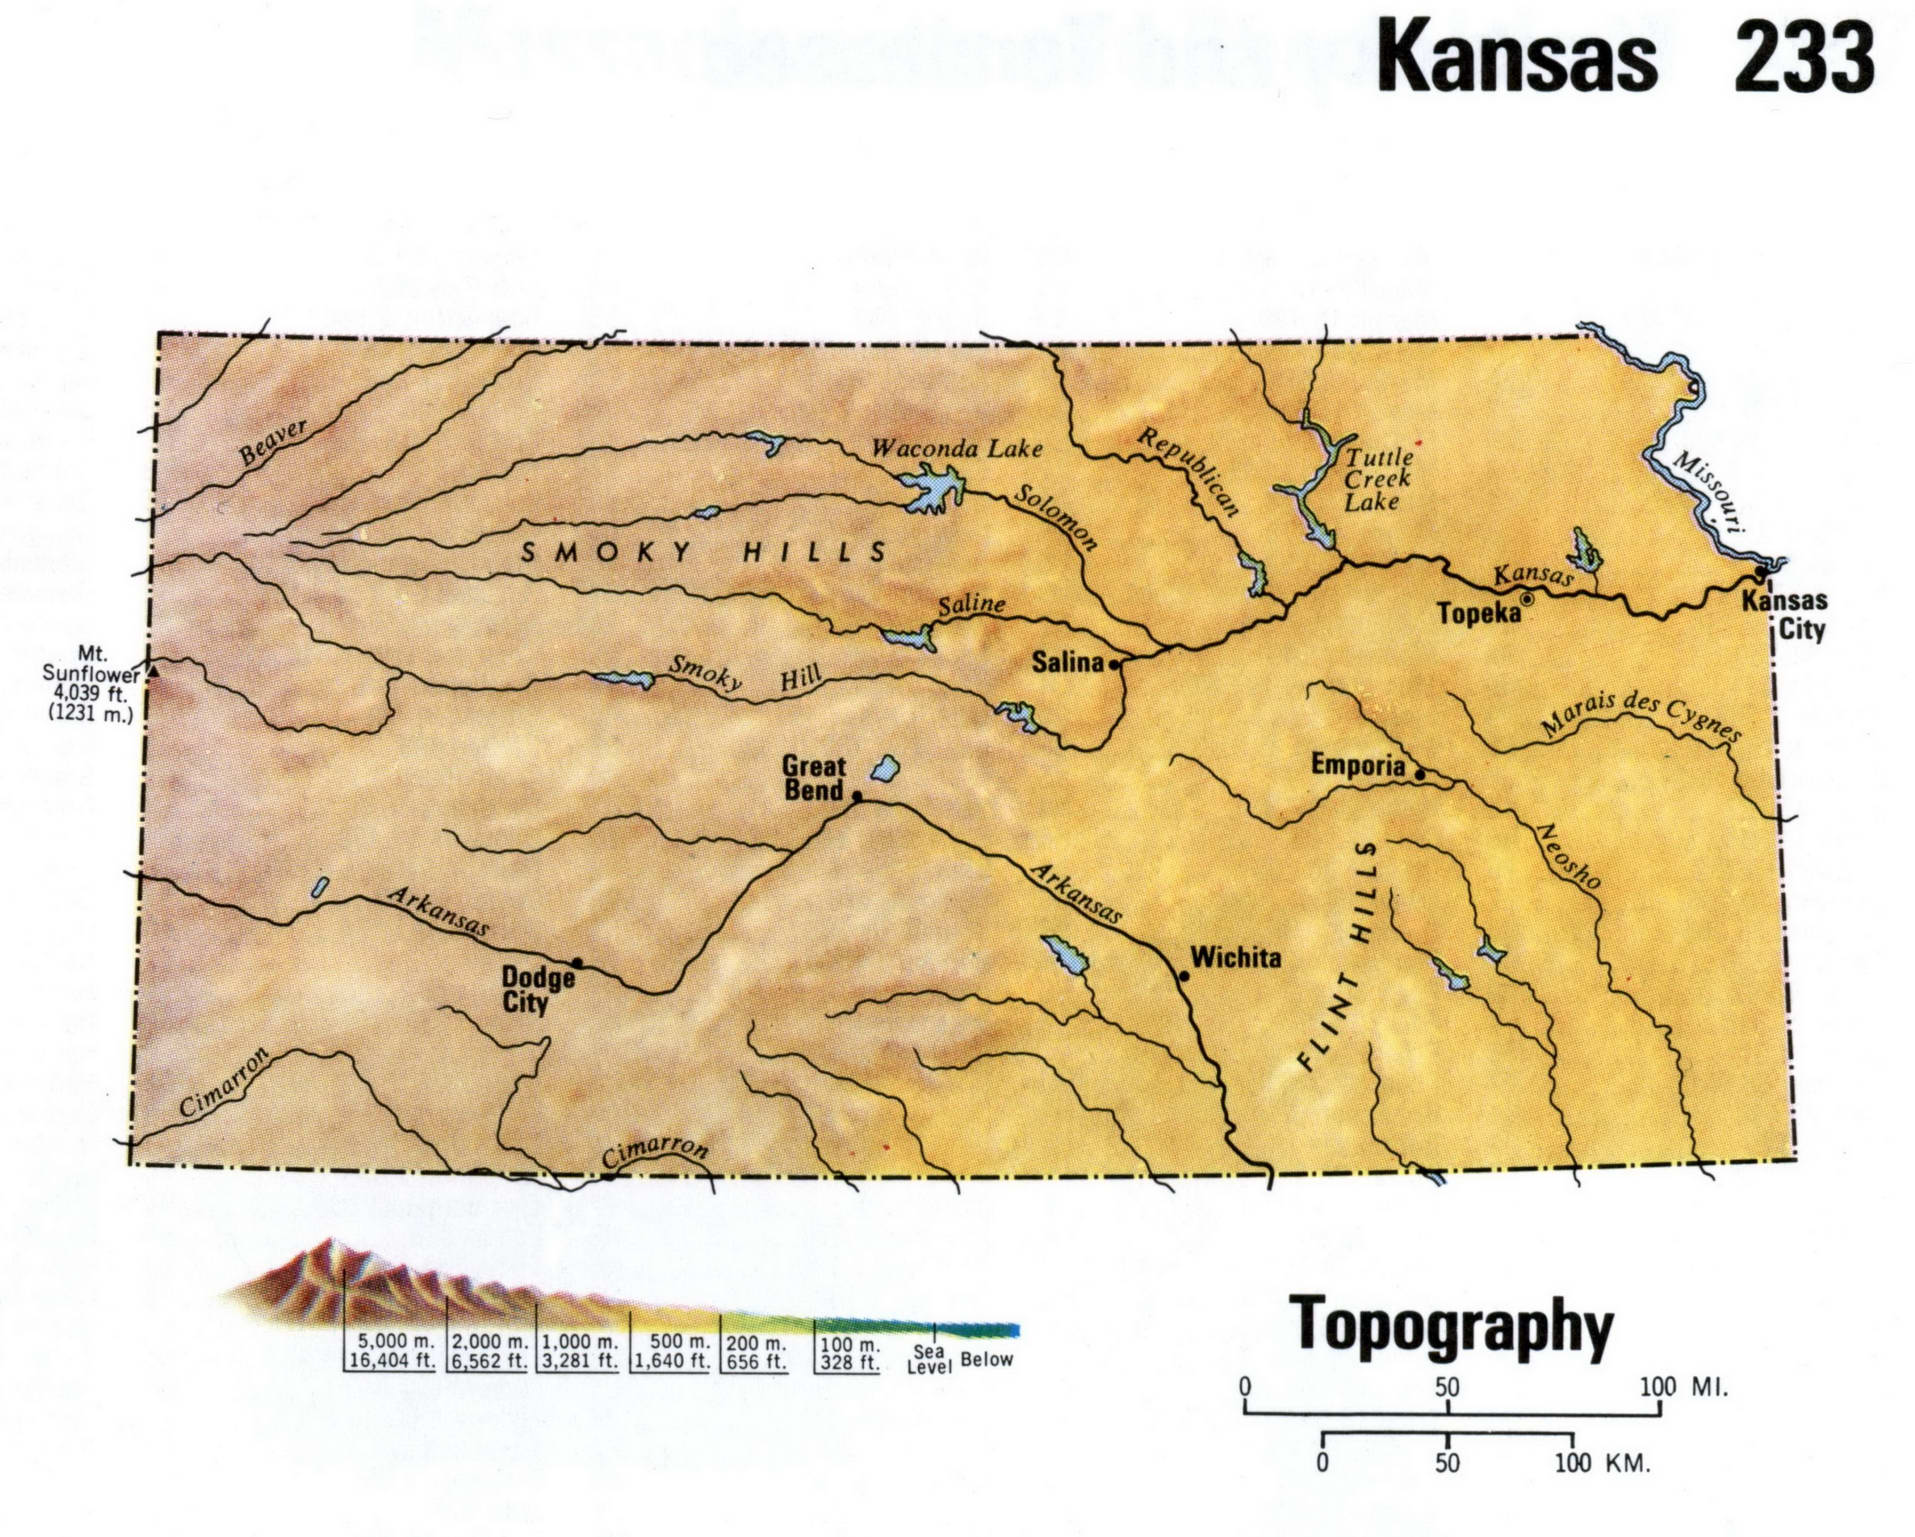 Topographical map of Kansas